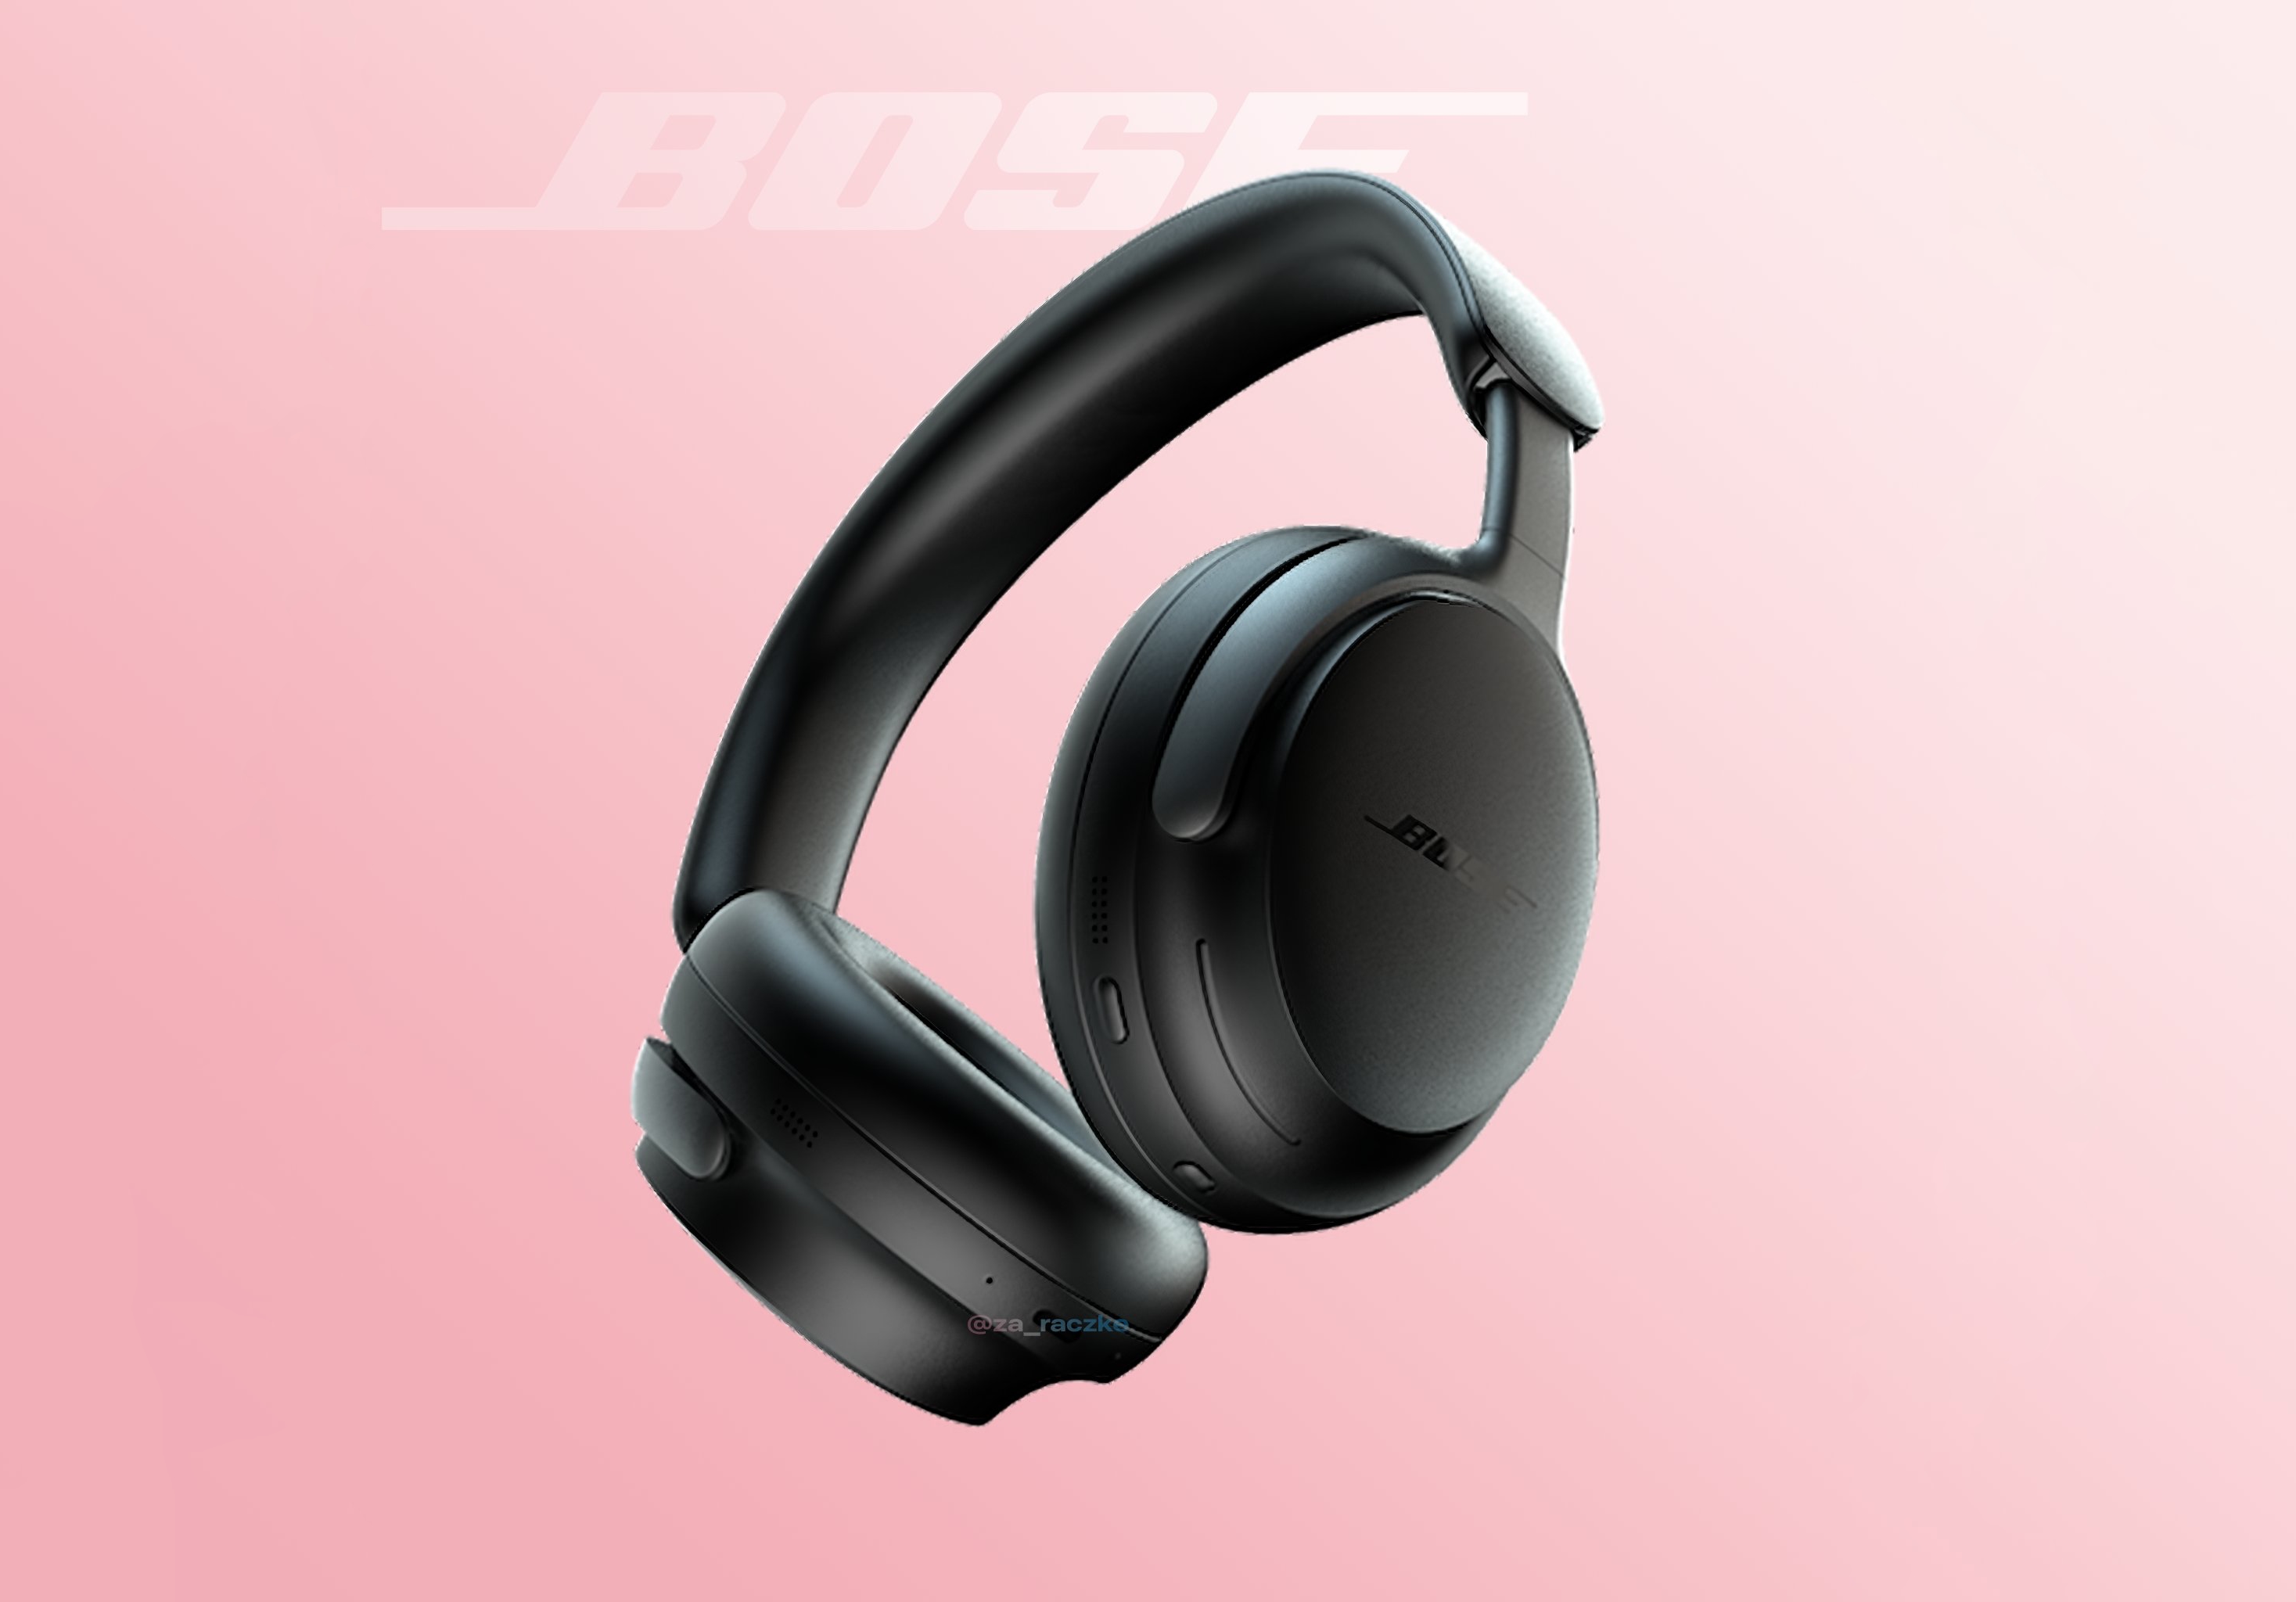 Bose is working on its flagship QuietComfort Ultra headphones with ANC, here's what the new product will look like